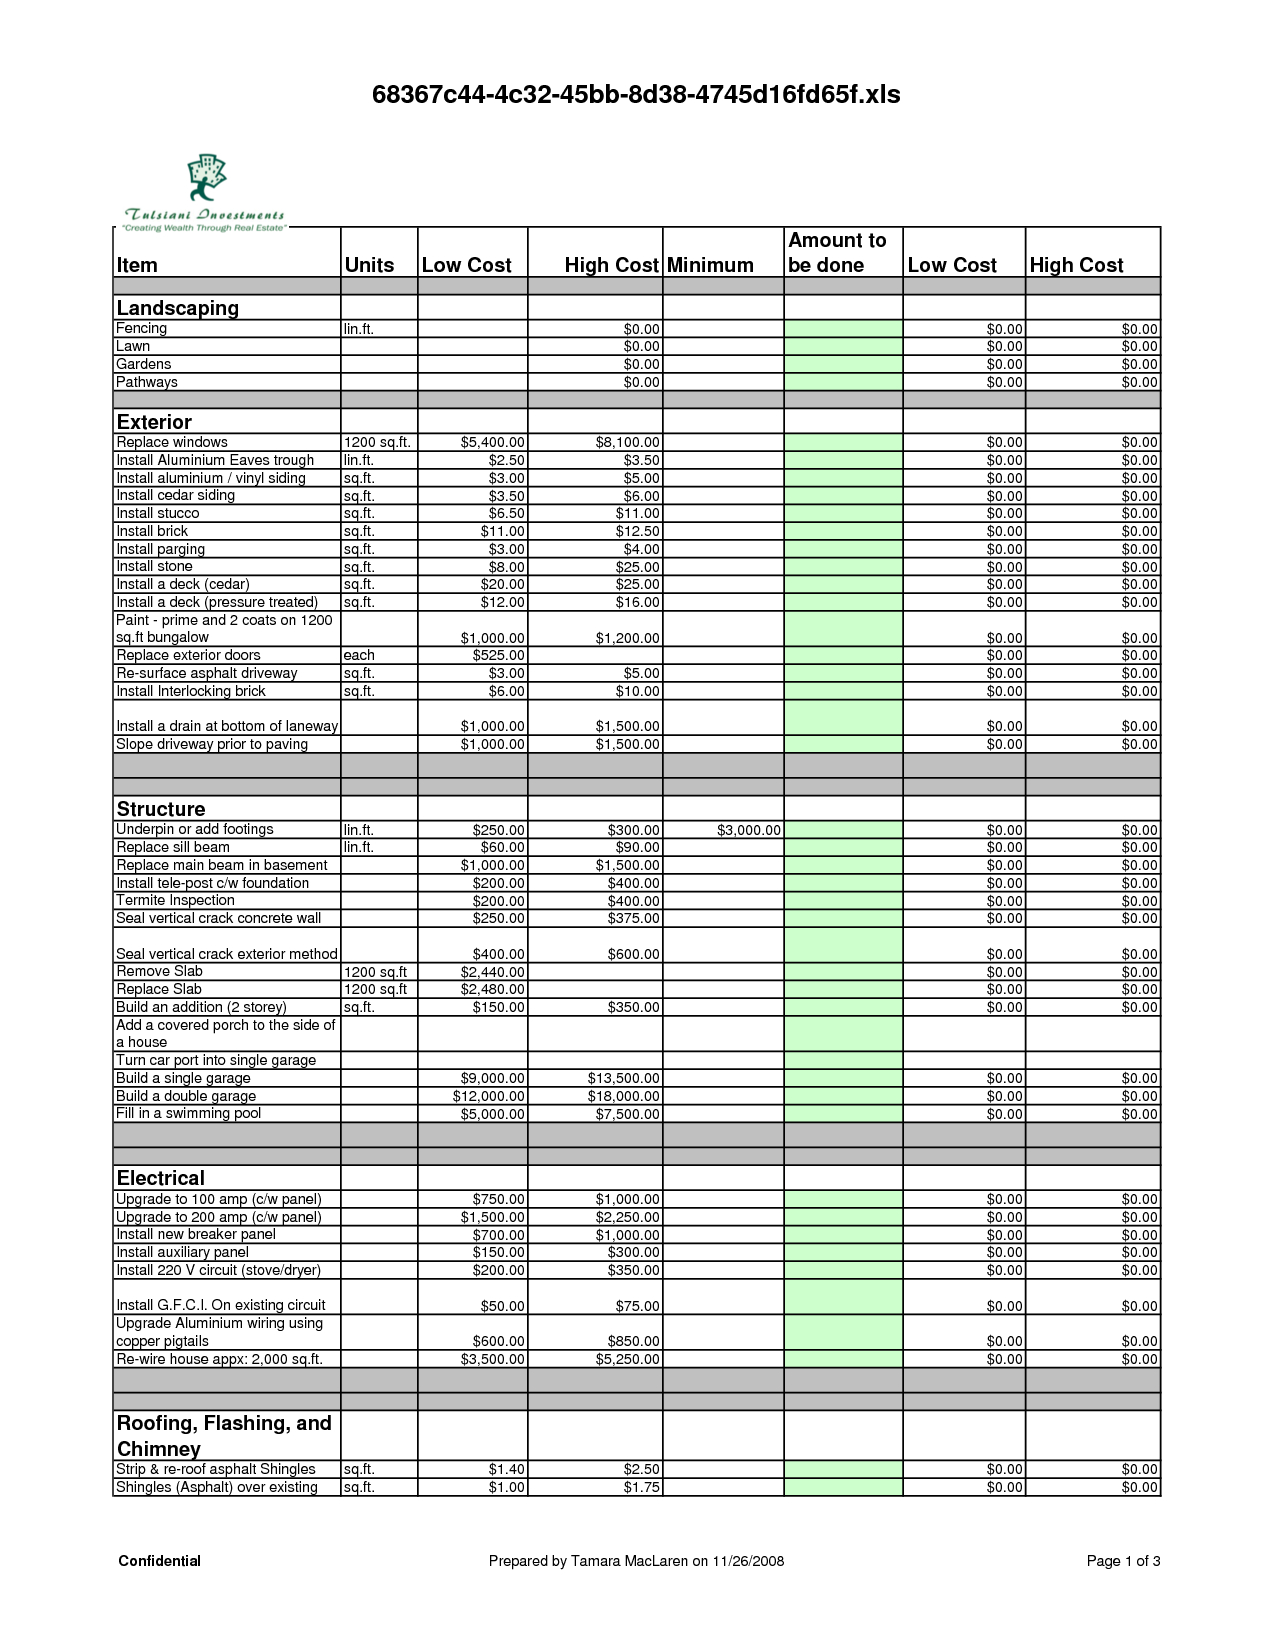 project-cost-estimate-template-spreadsheet-inside-estimating-spreadsheets-in-excel-free